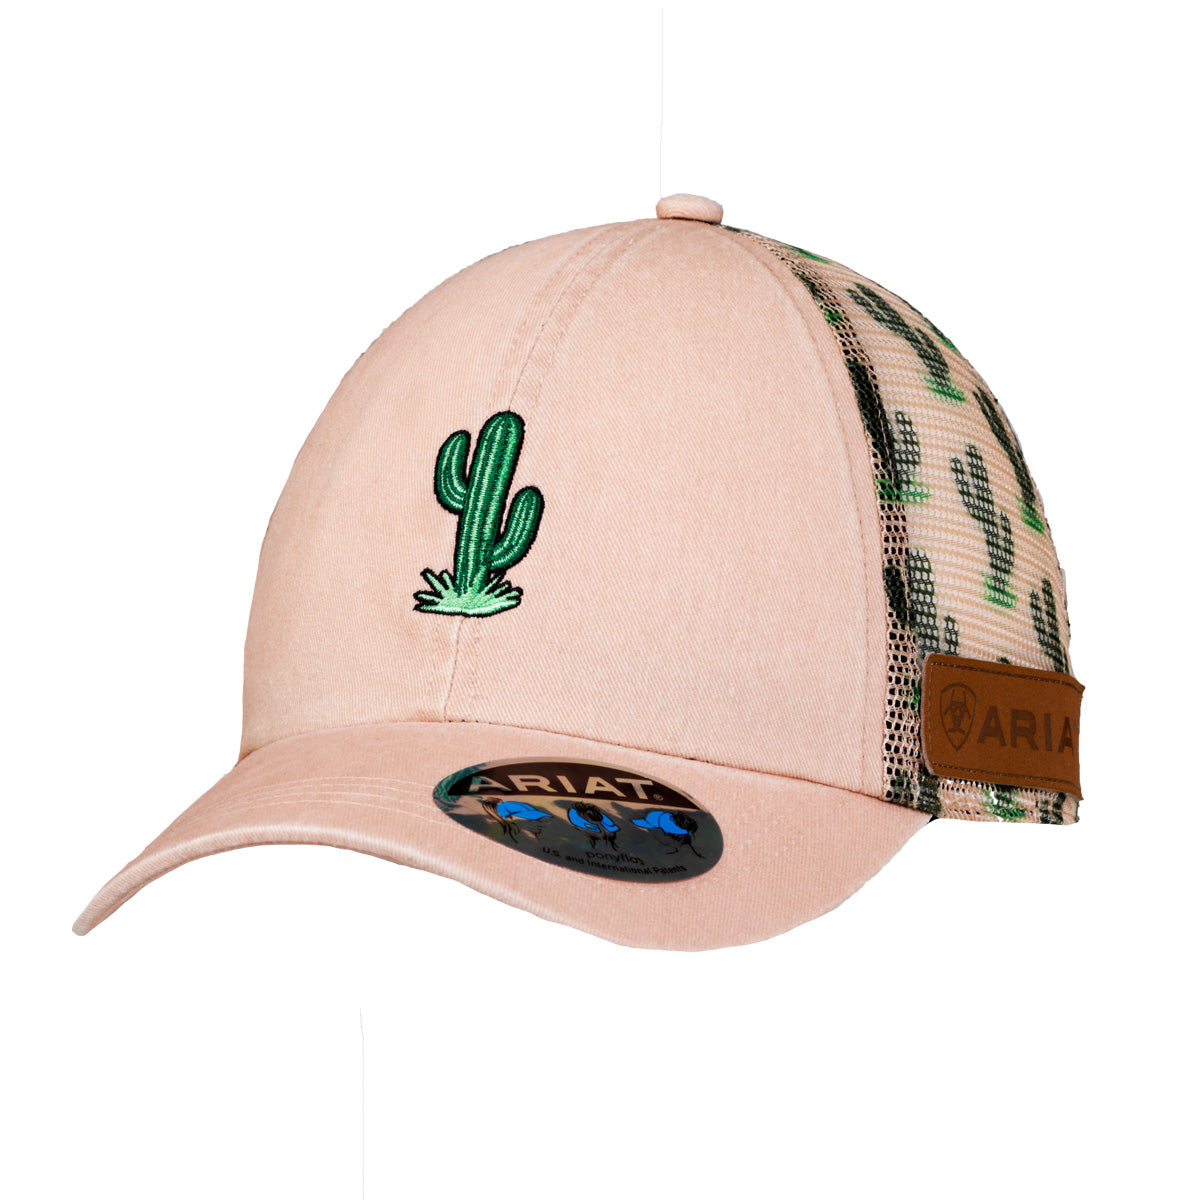 Ariat Youth Embroidered Cactus Cap - Pink